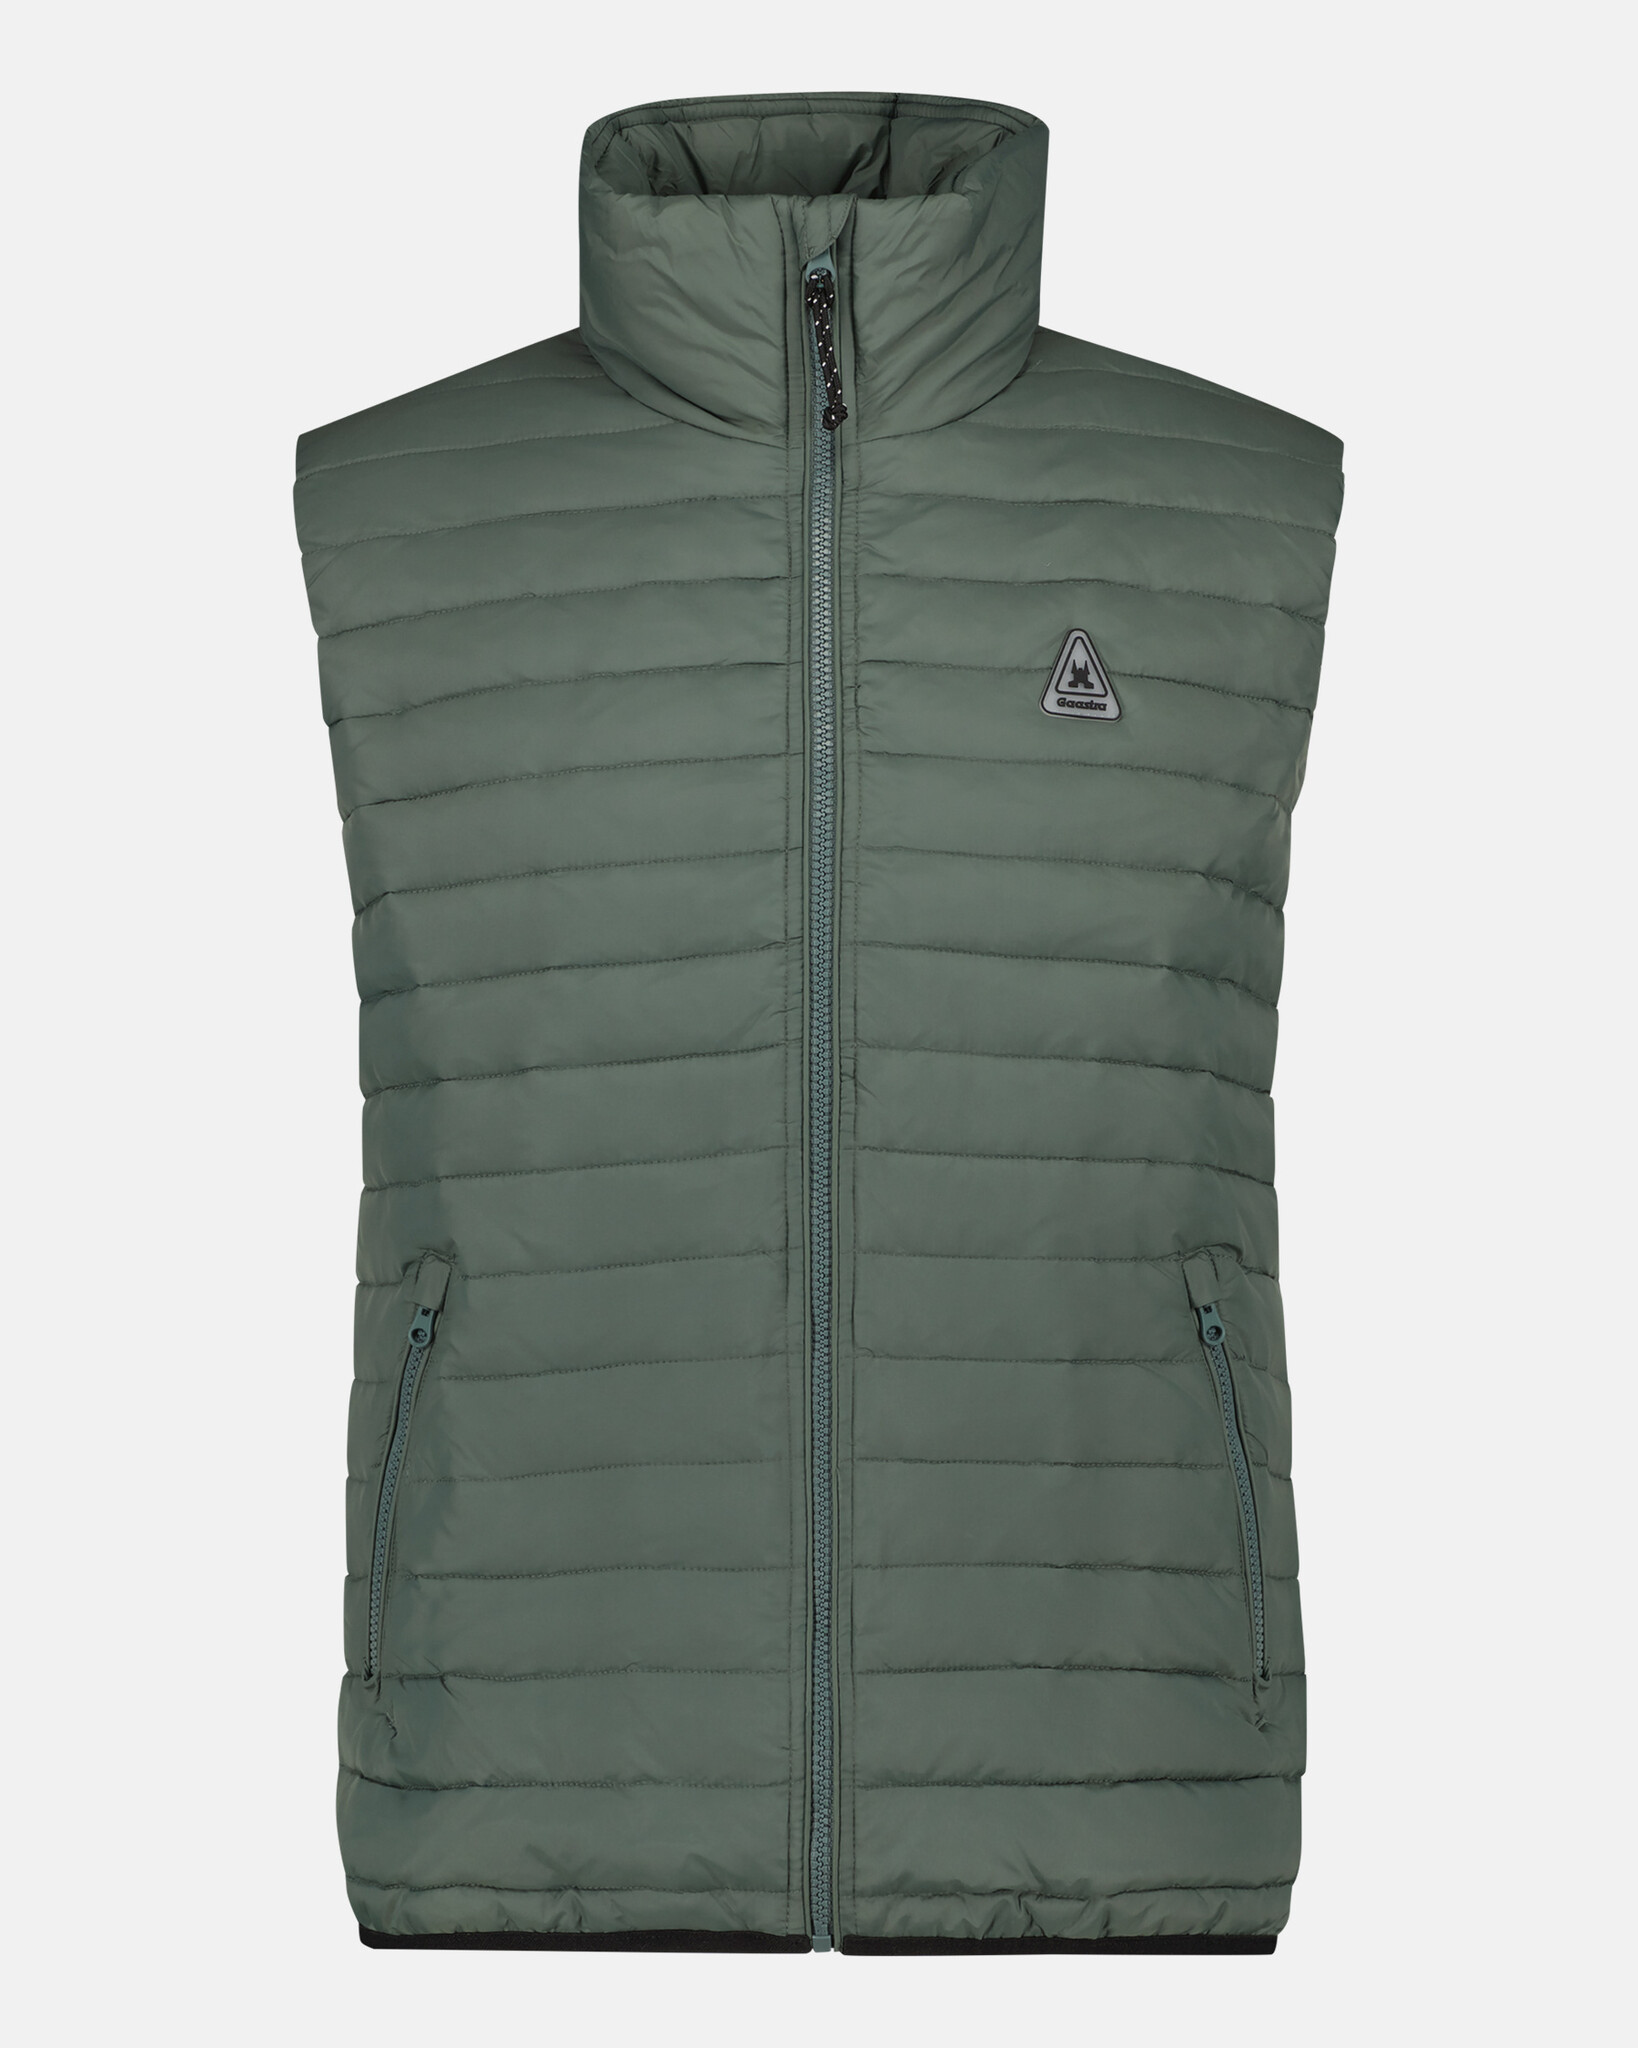 Men's Lightweight, water repellent bodywarmer with 100% recycled fabric and REPREVE®  filling